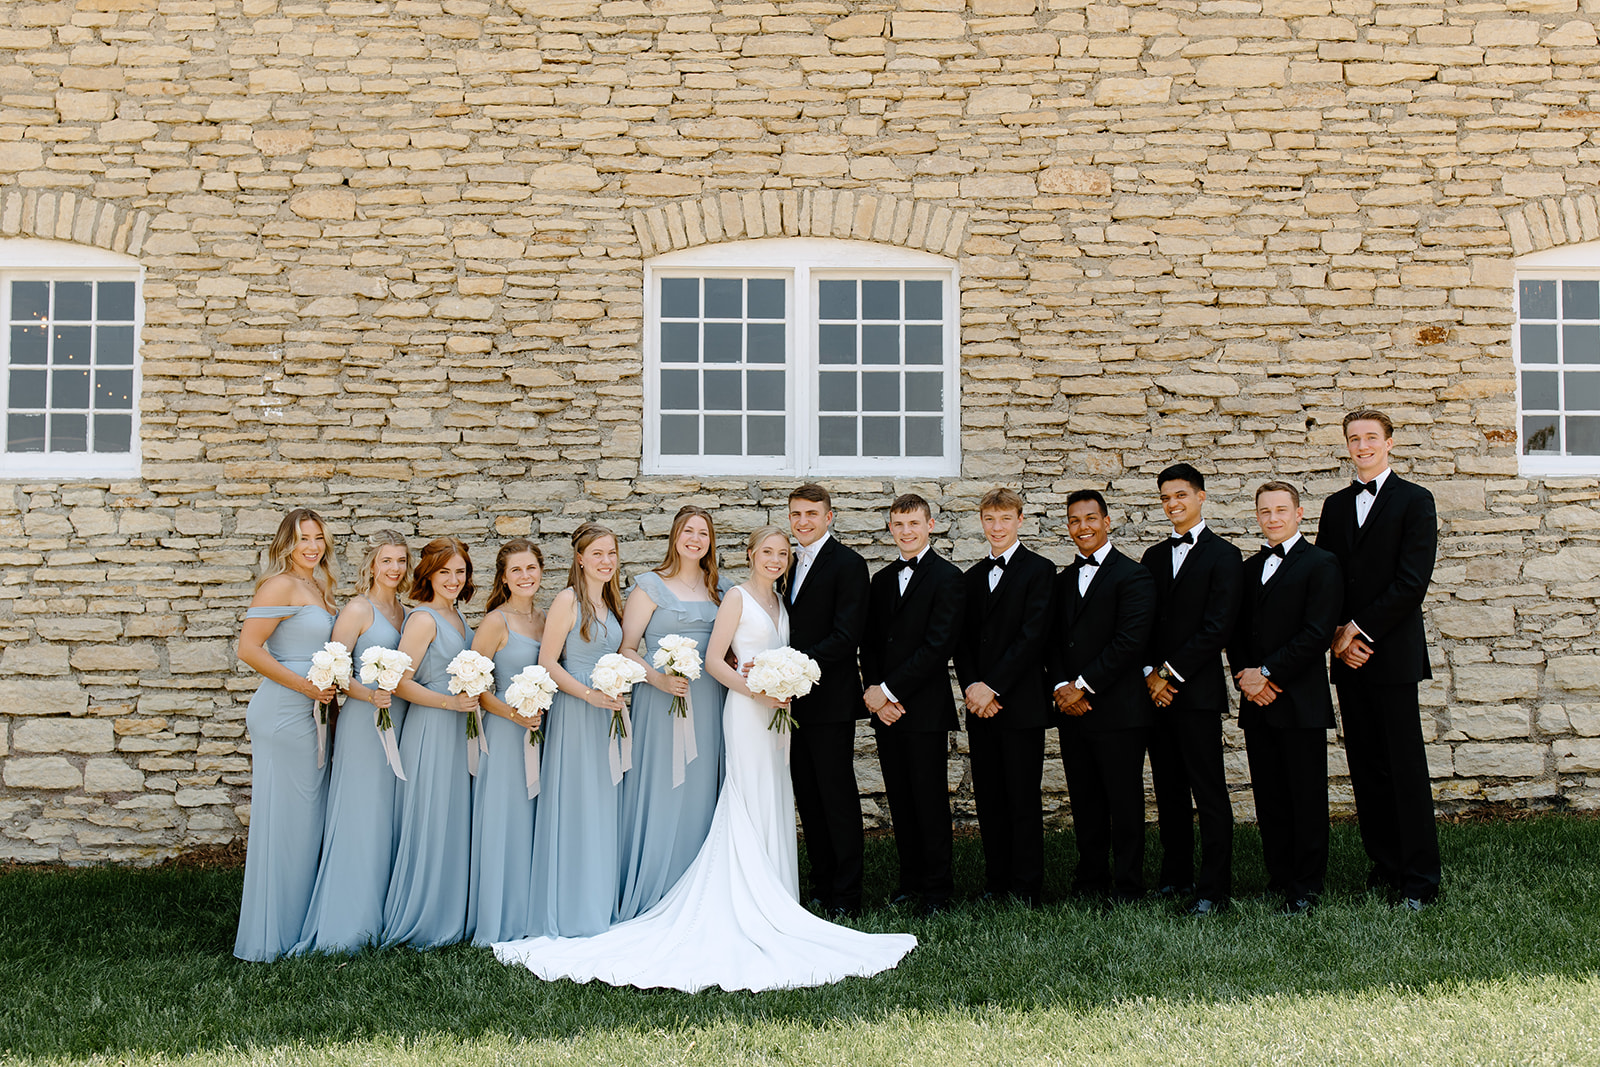 Wedding party in front of brick building